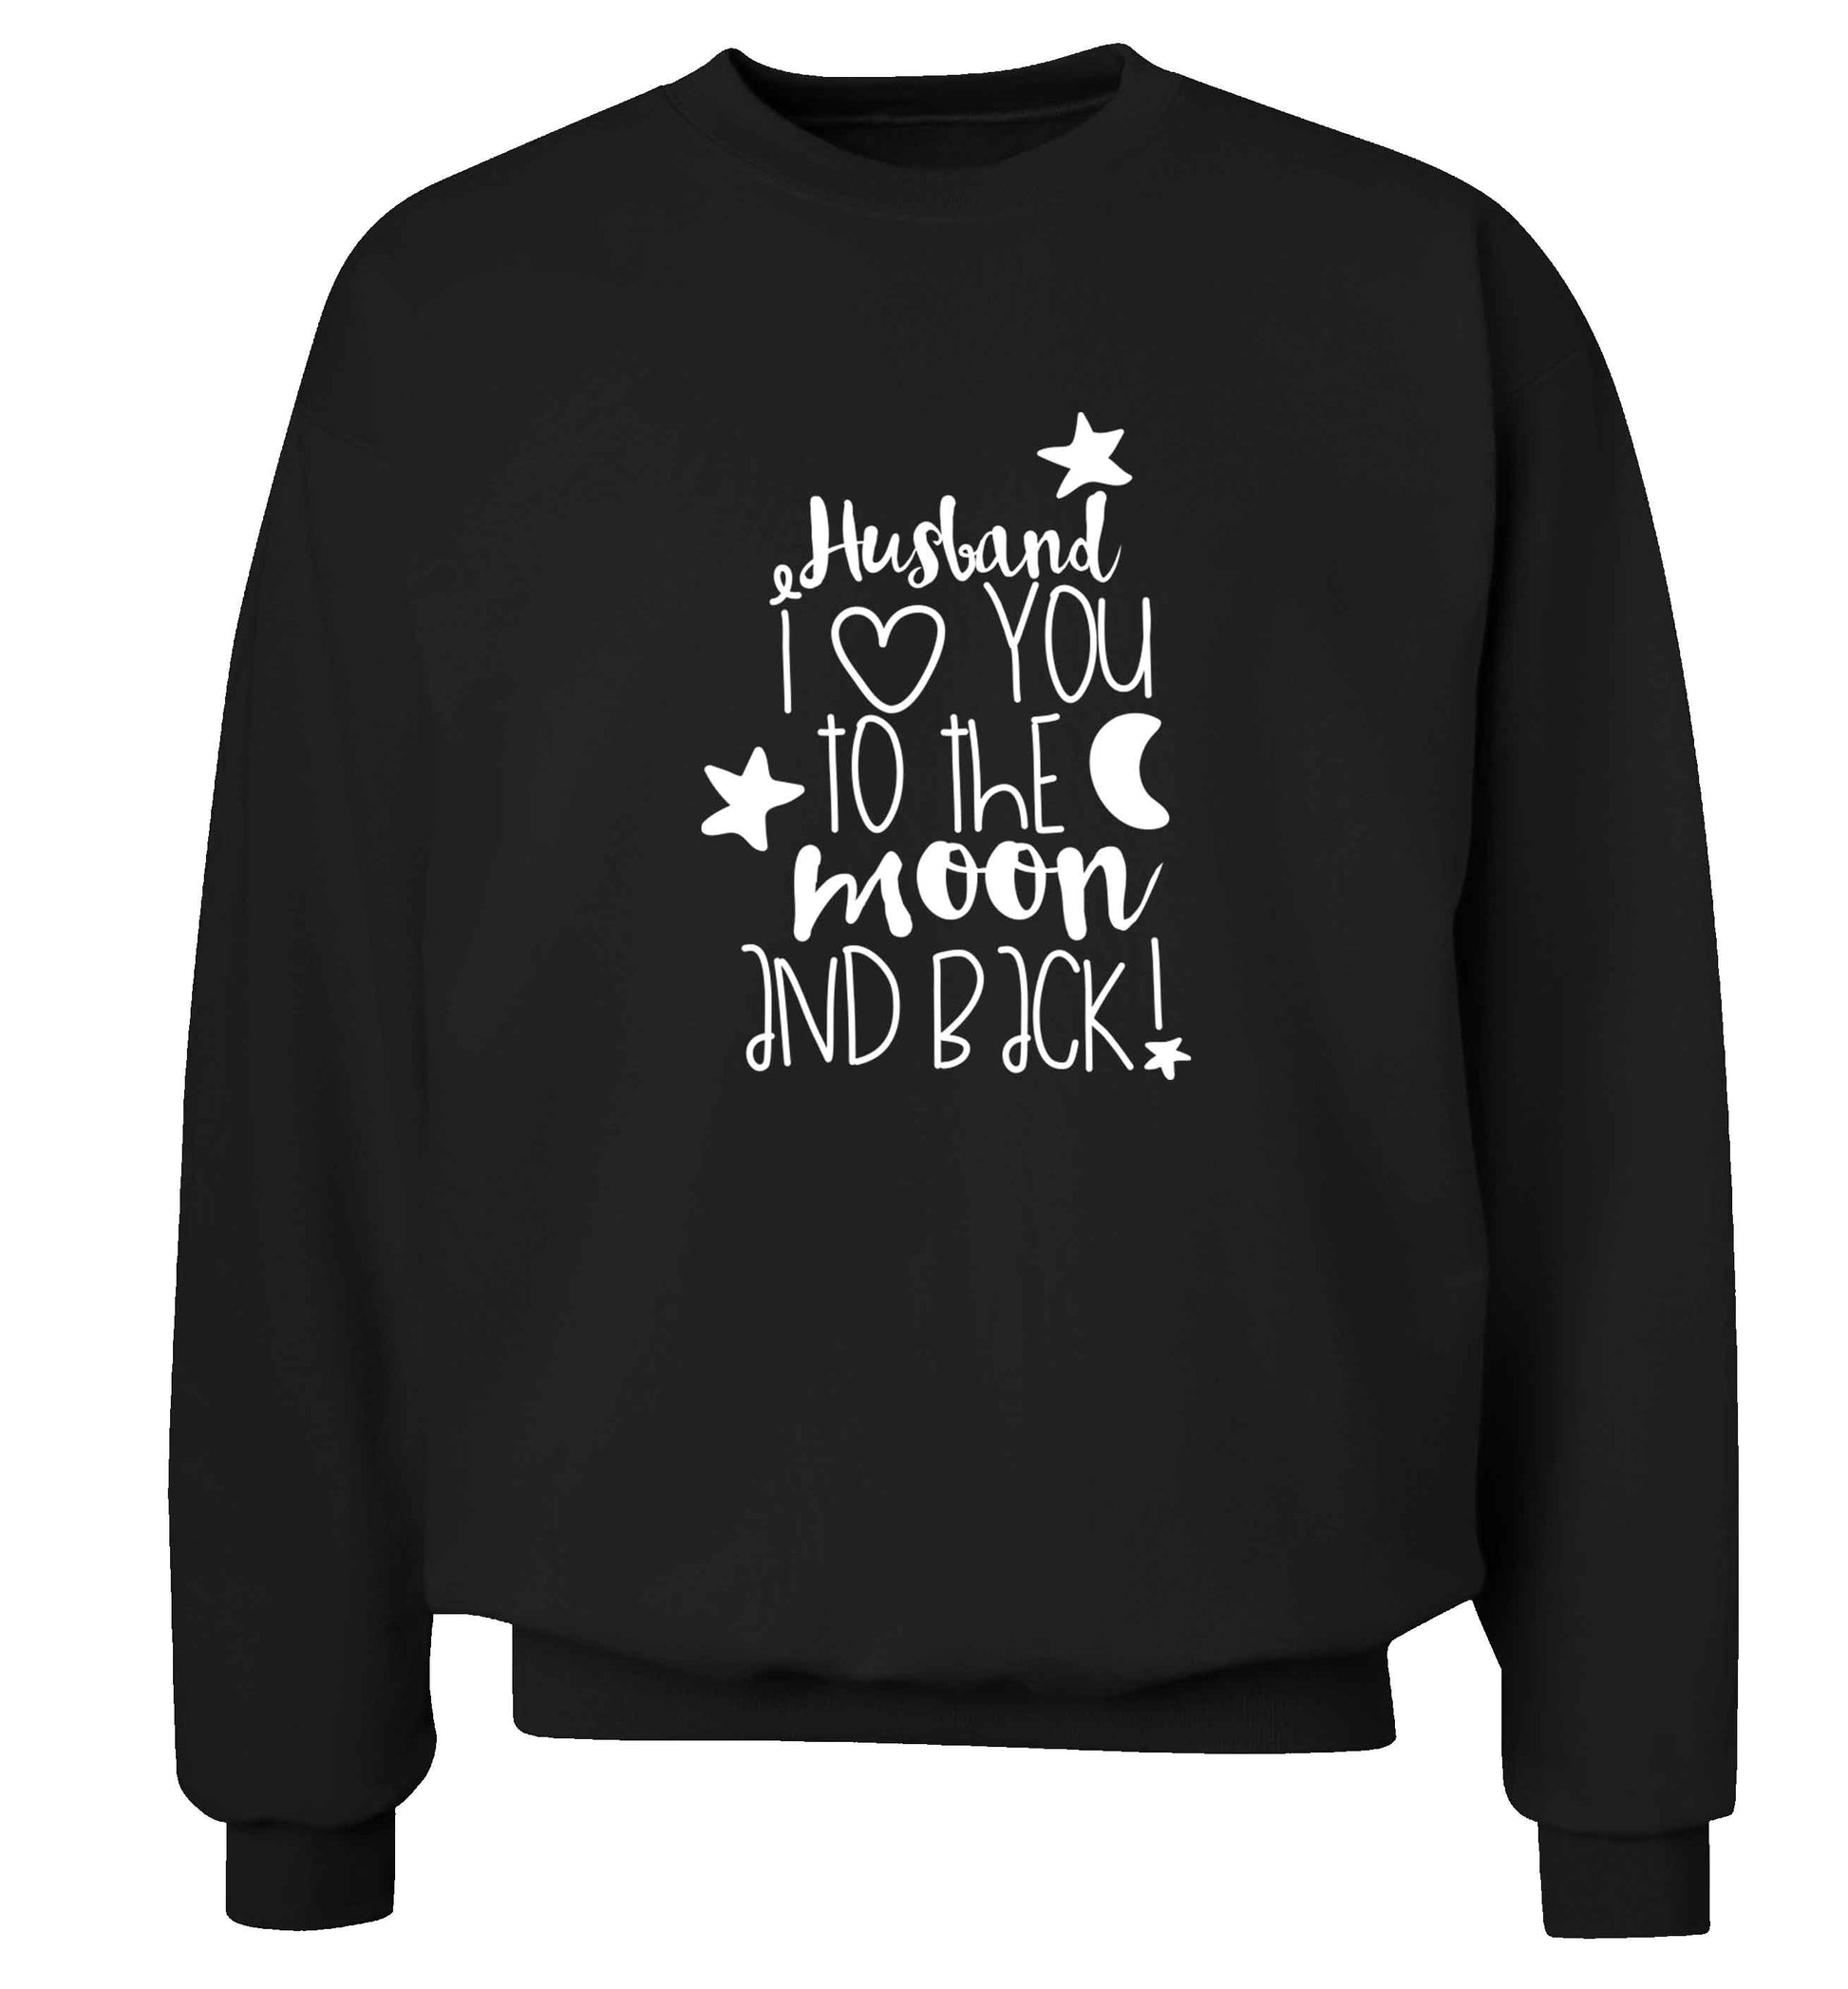 Husband I love you to the moon and back adult's unisex black sweater 2XL